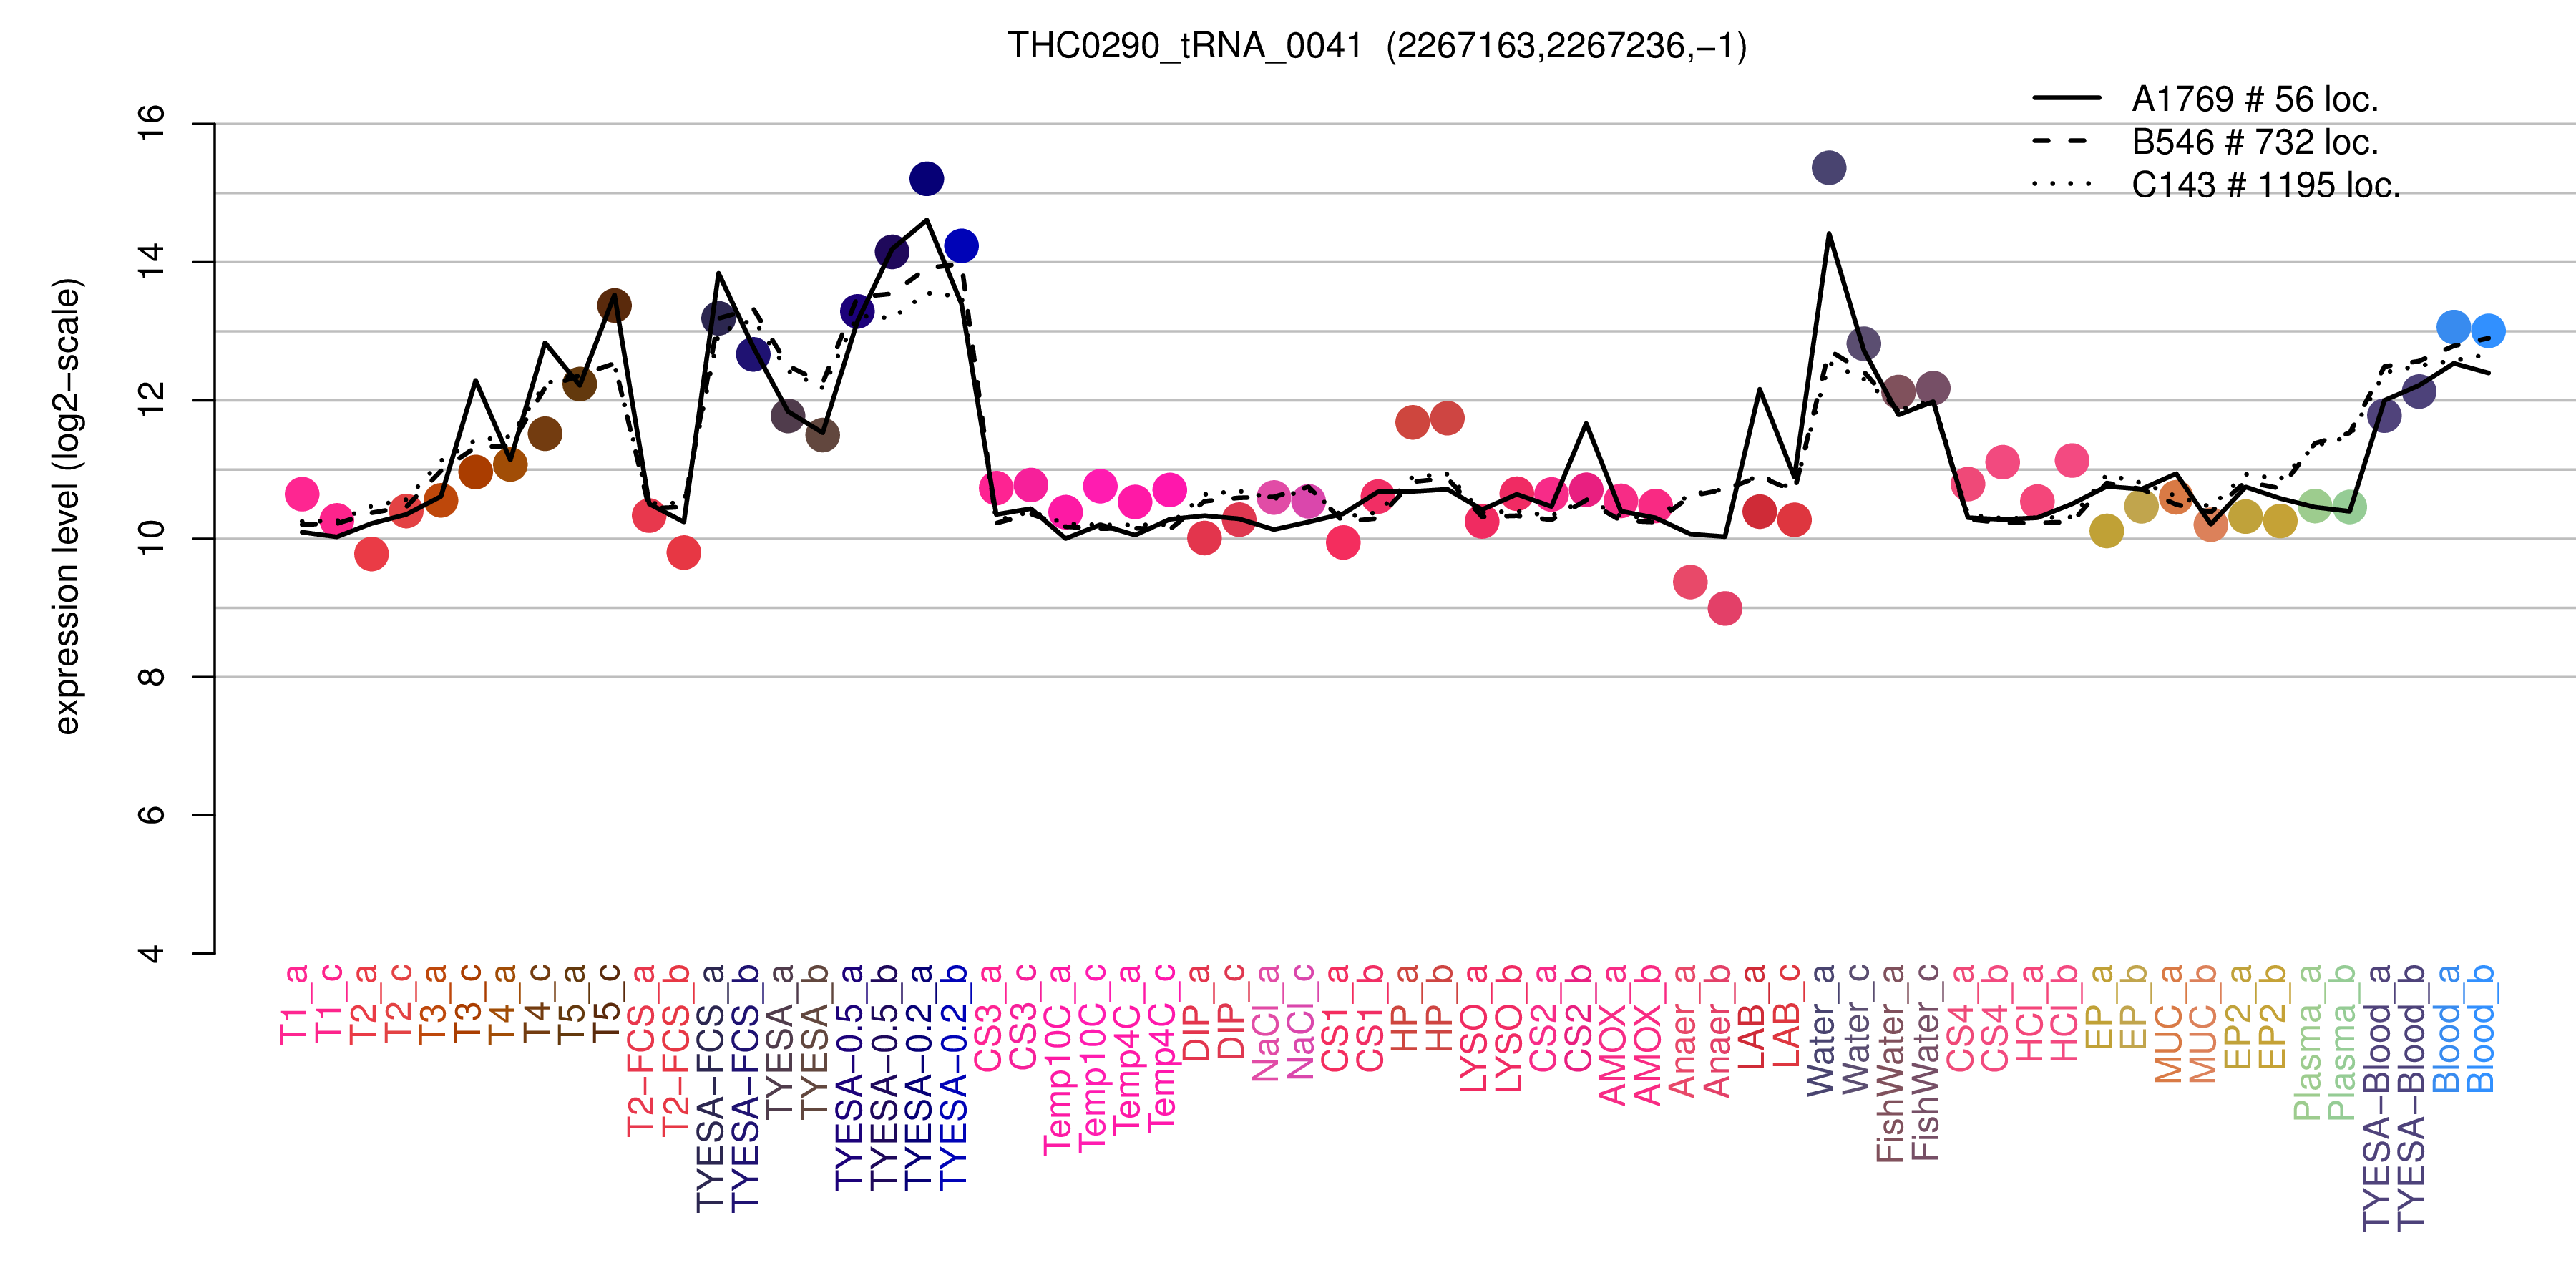 THC0290_tRNA_0041 expression levels among conditions